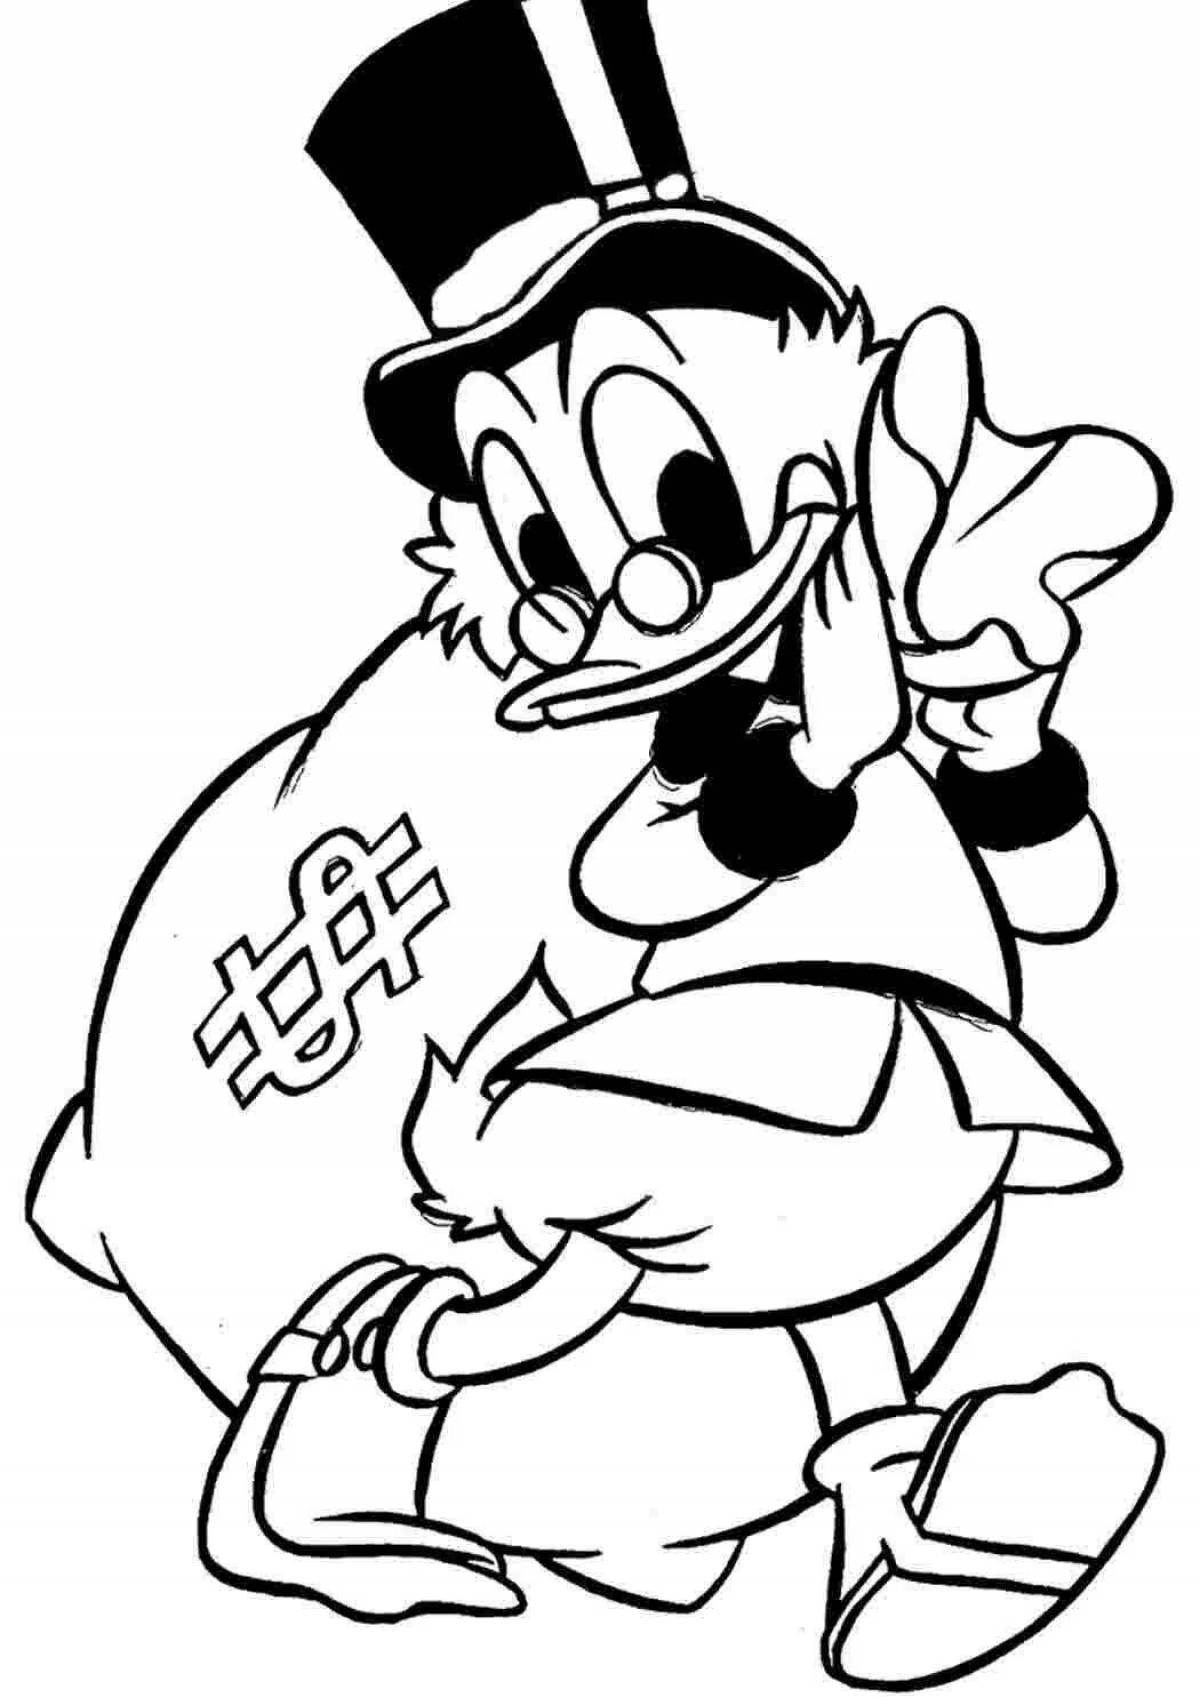 Donald duck with money #12